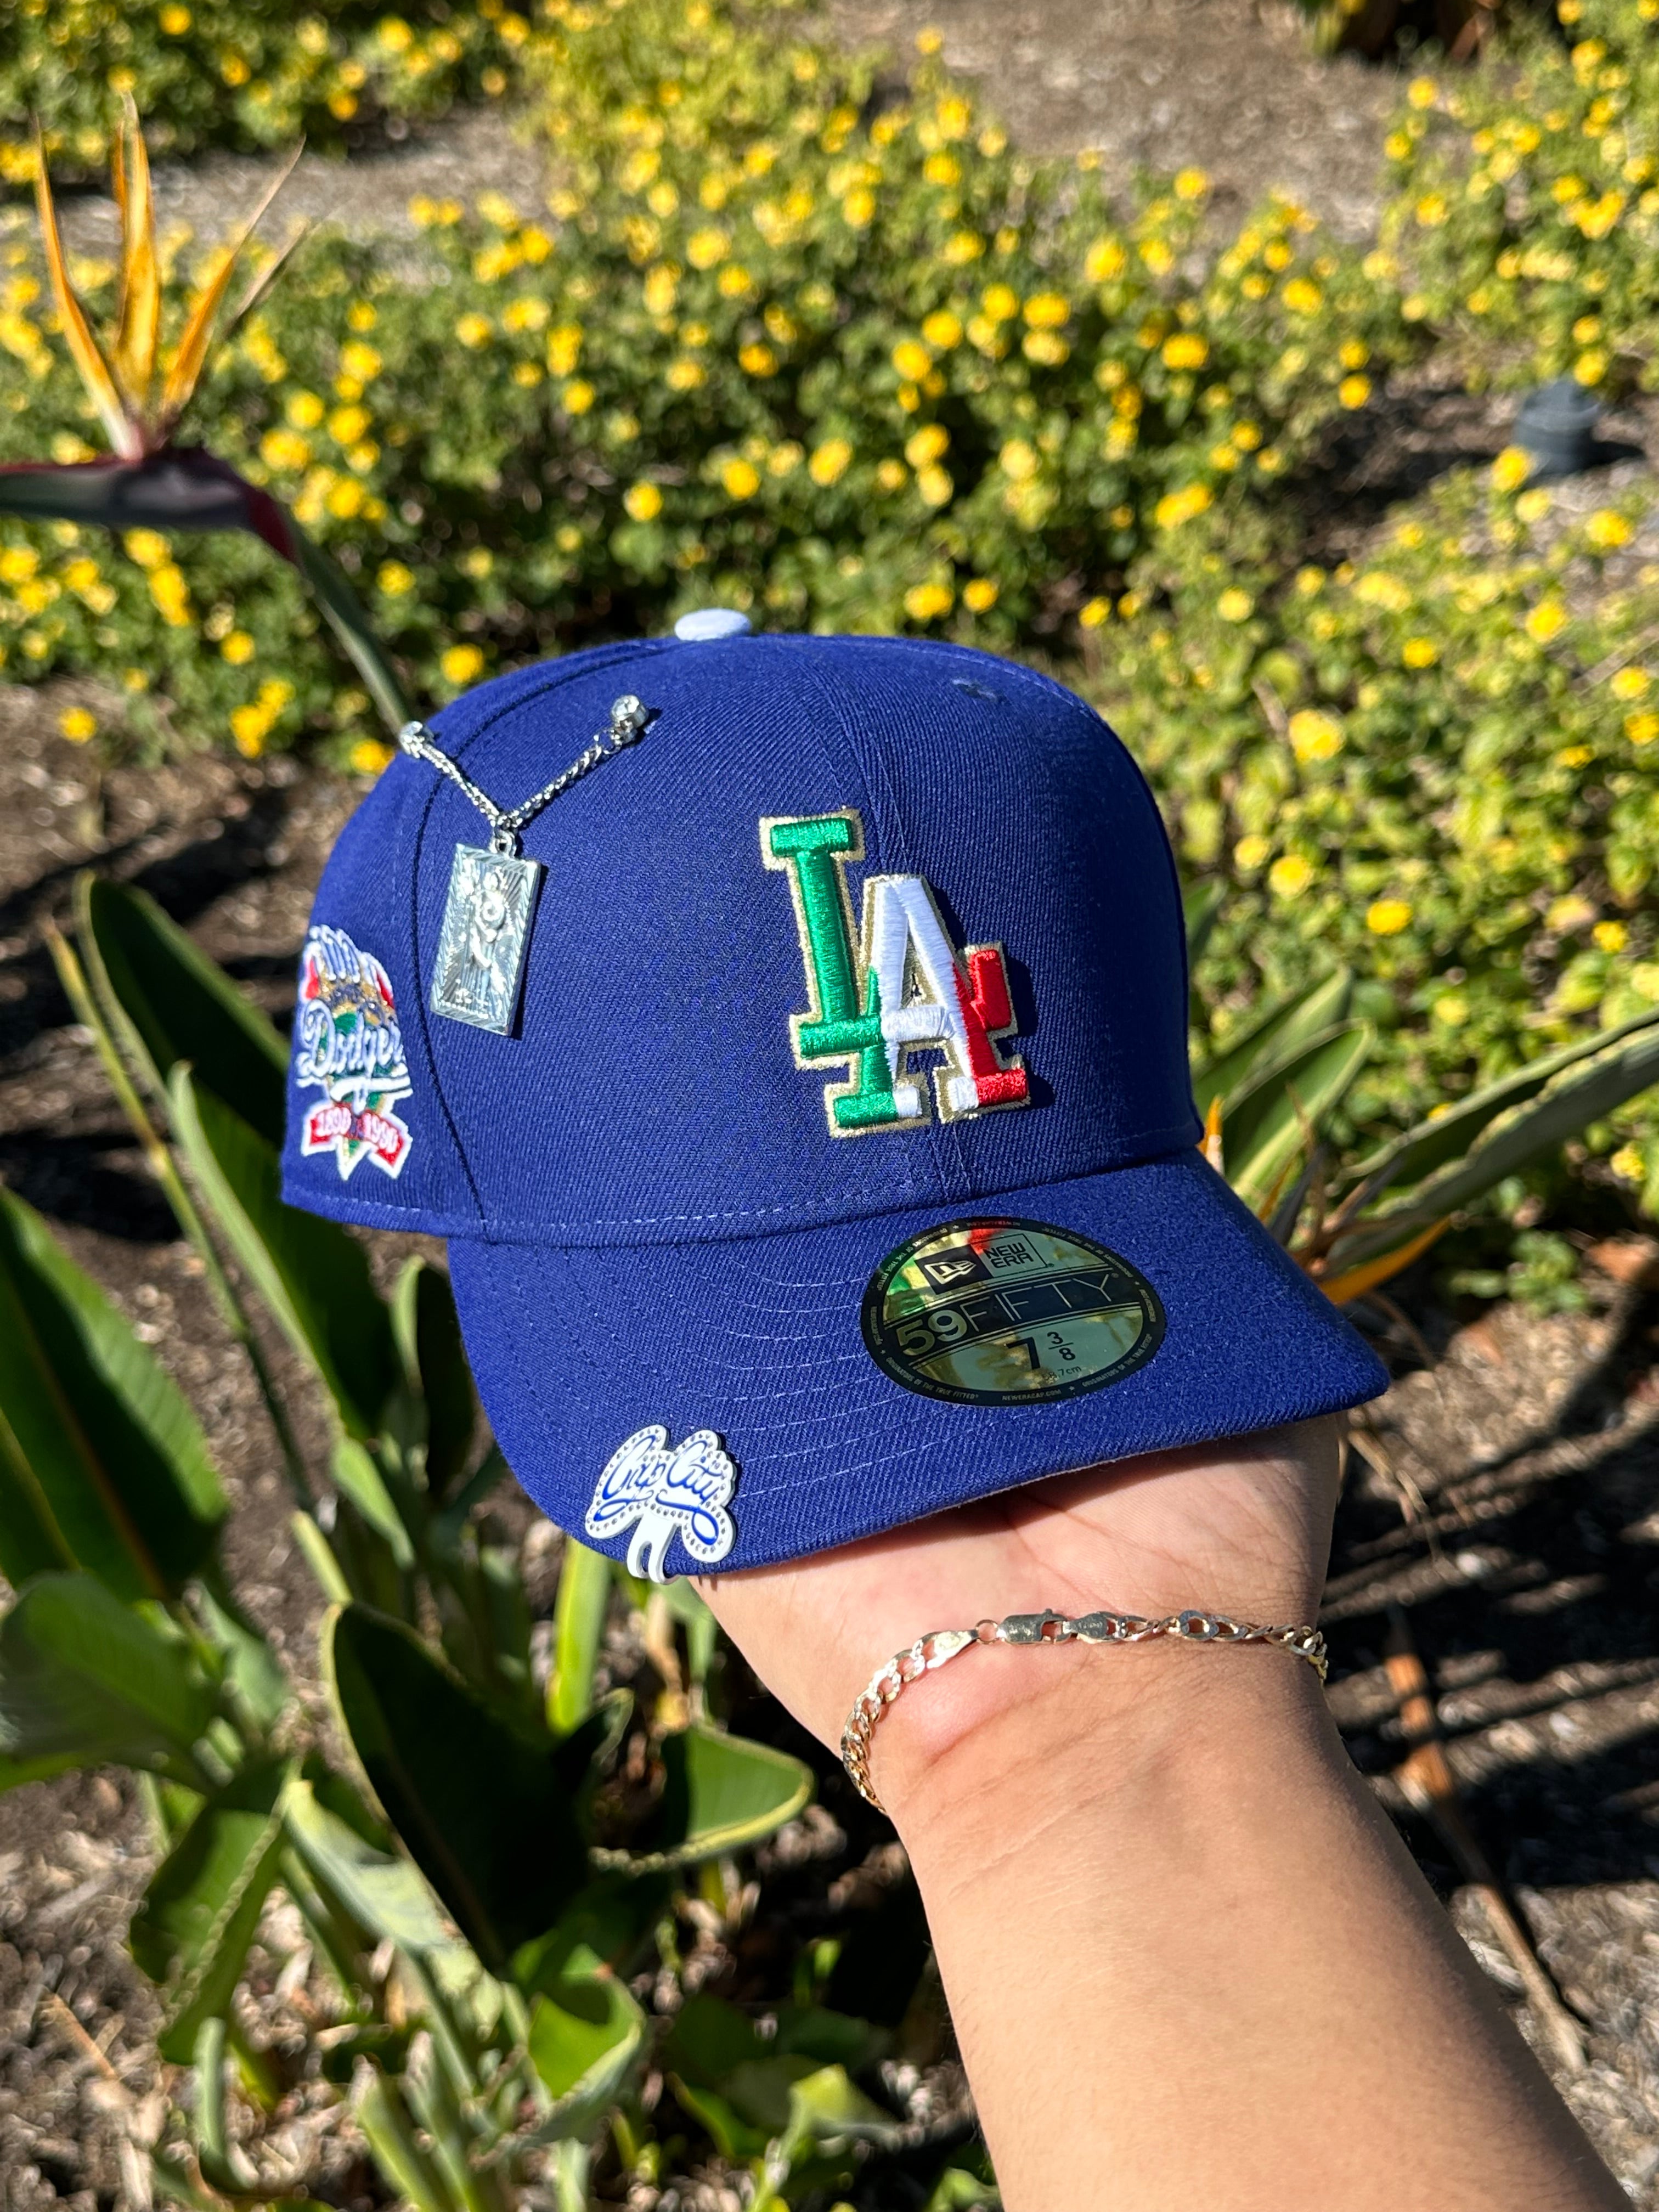 NEW ERA EXCLUSIVE 59FIFTY BLUE LOS ANGELES DODGERS W/ MEXICAN FLAG LOGO + 100TH ANNIVERSARY SIDEPATCH